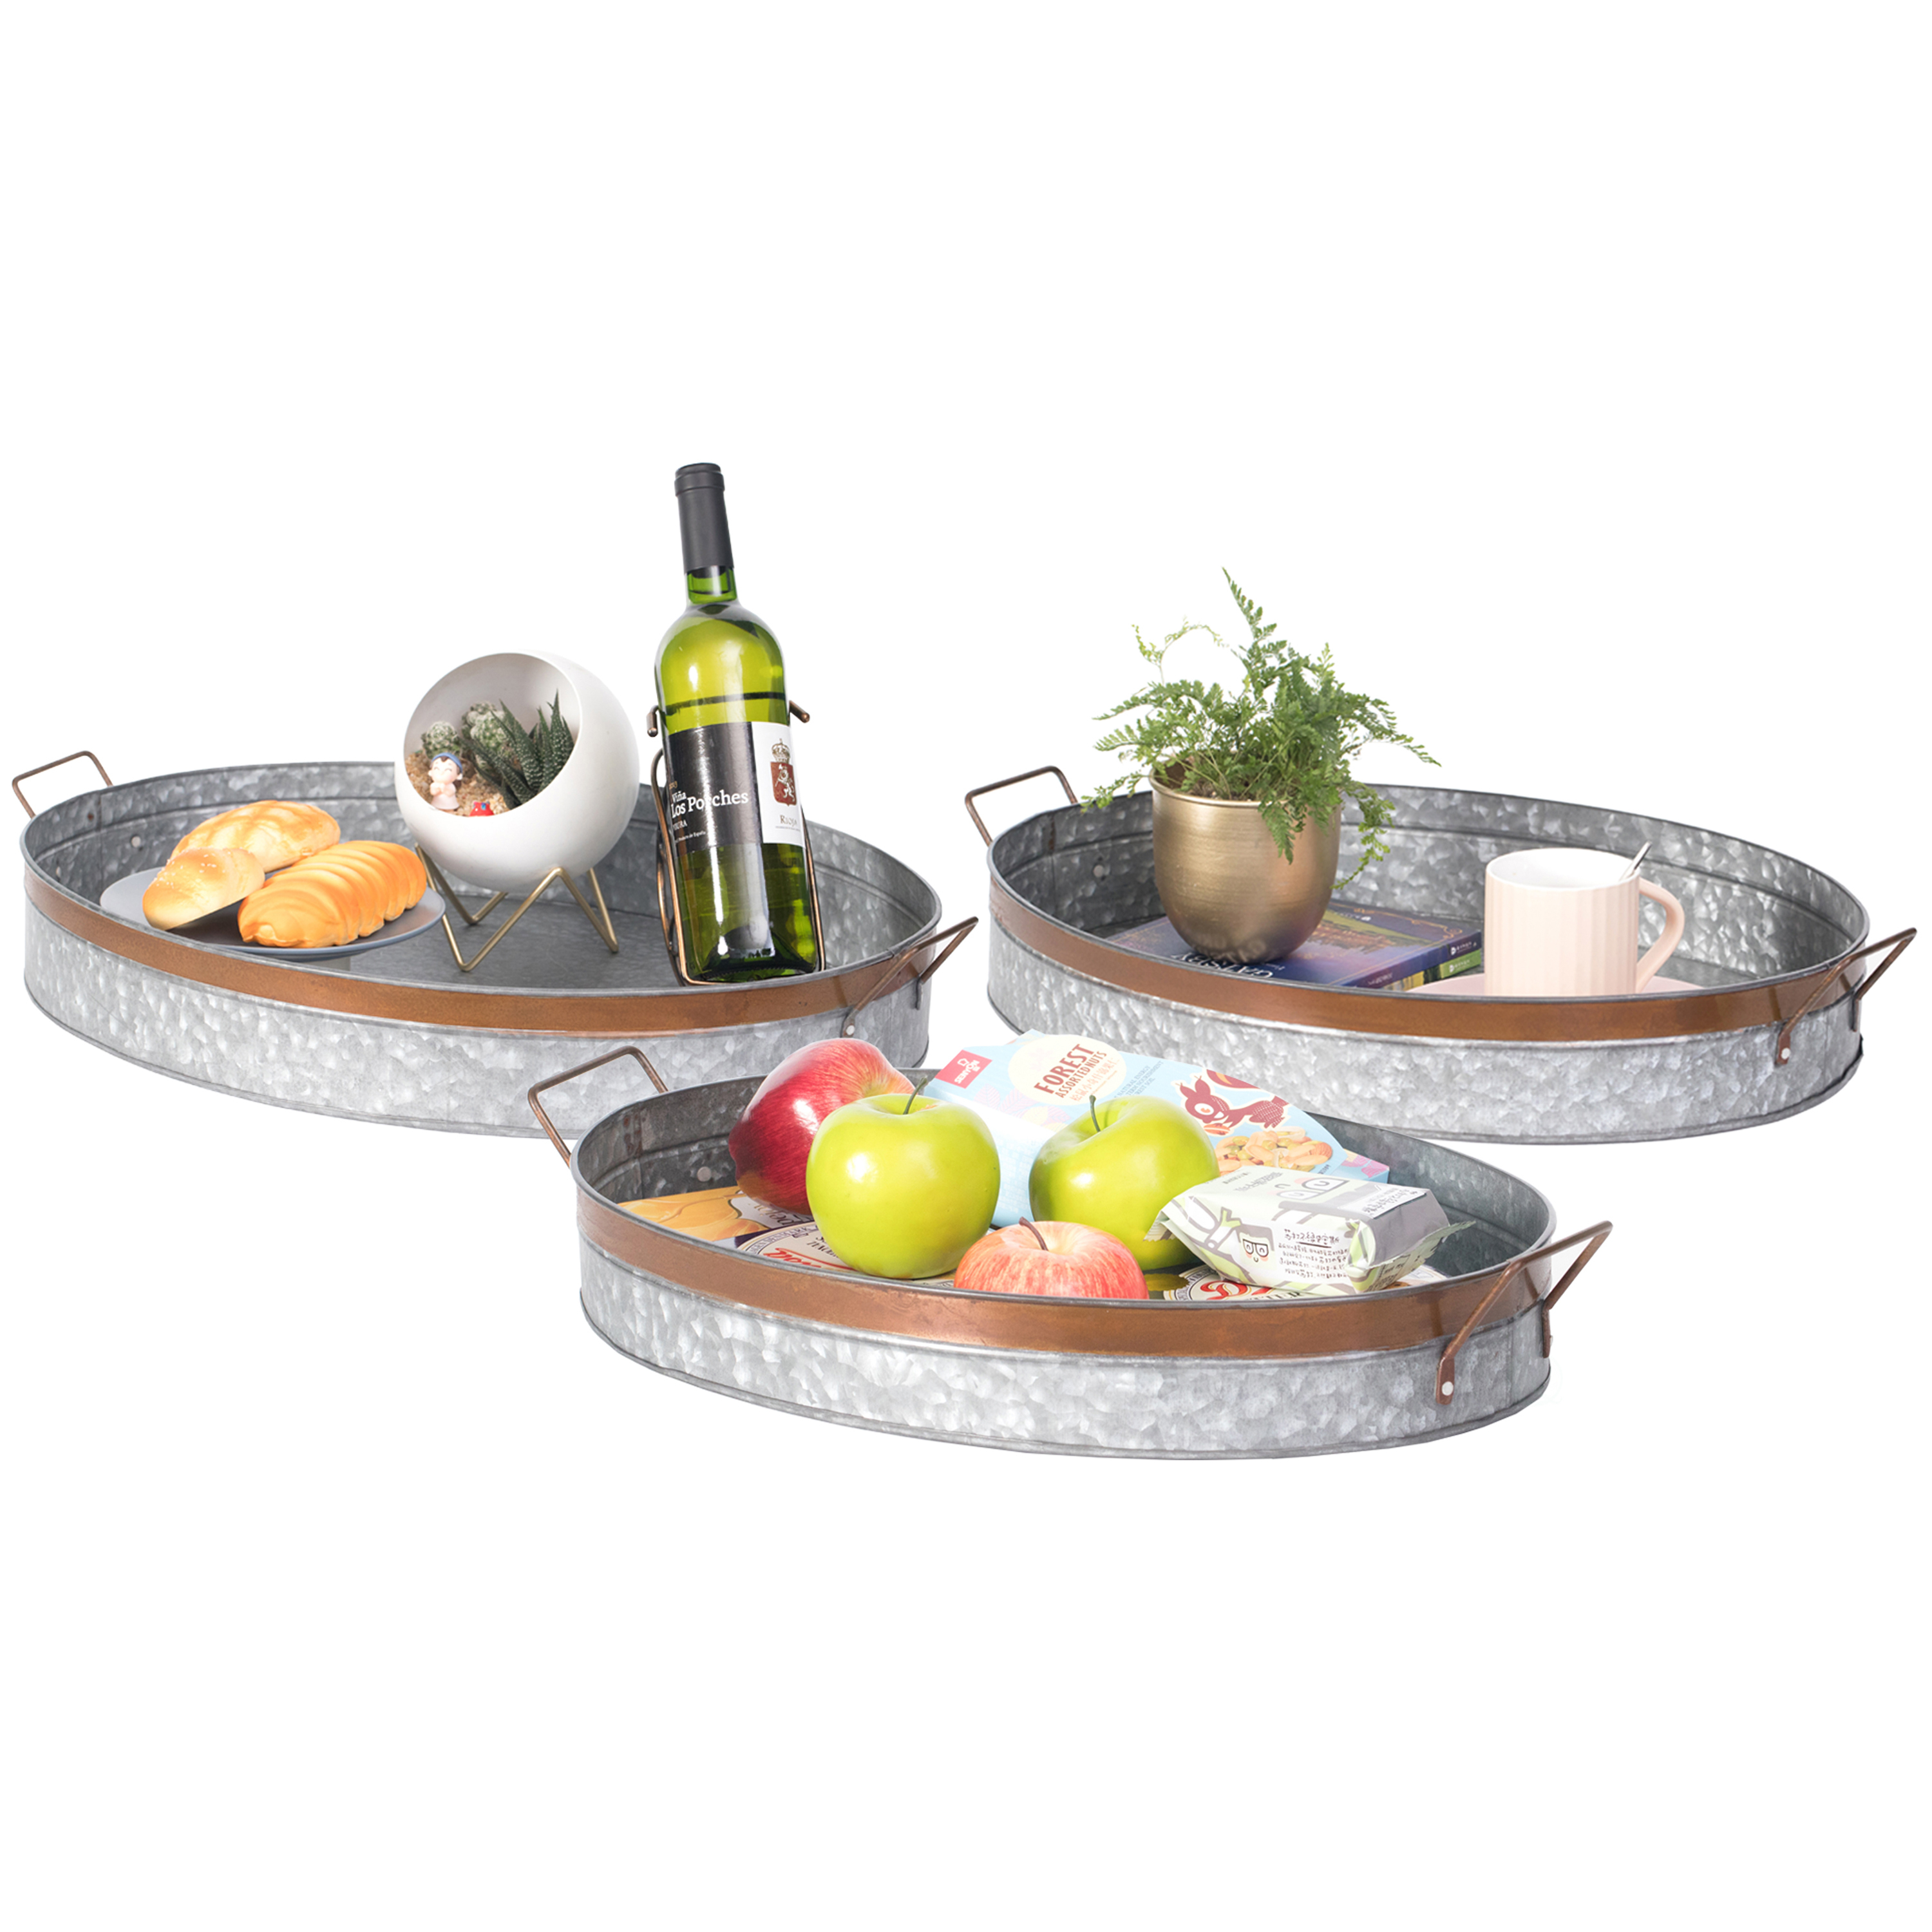 Galvanized Metal Oval Rustic Serving Tray With Handles - Medium